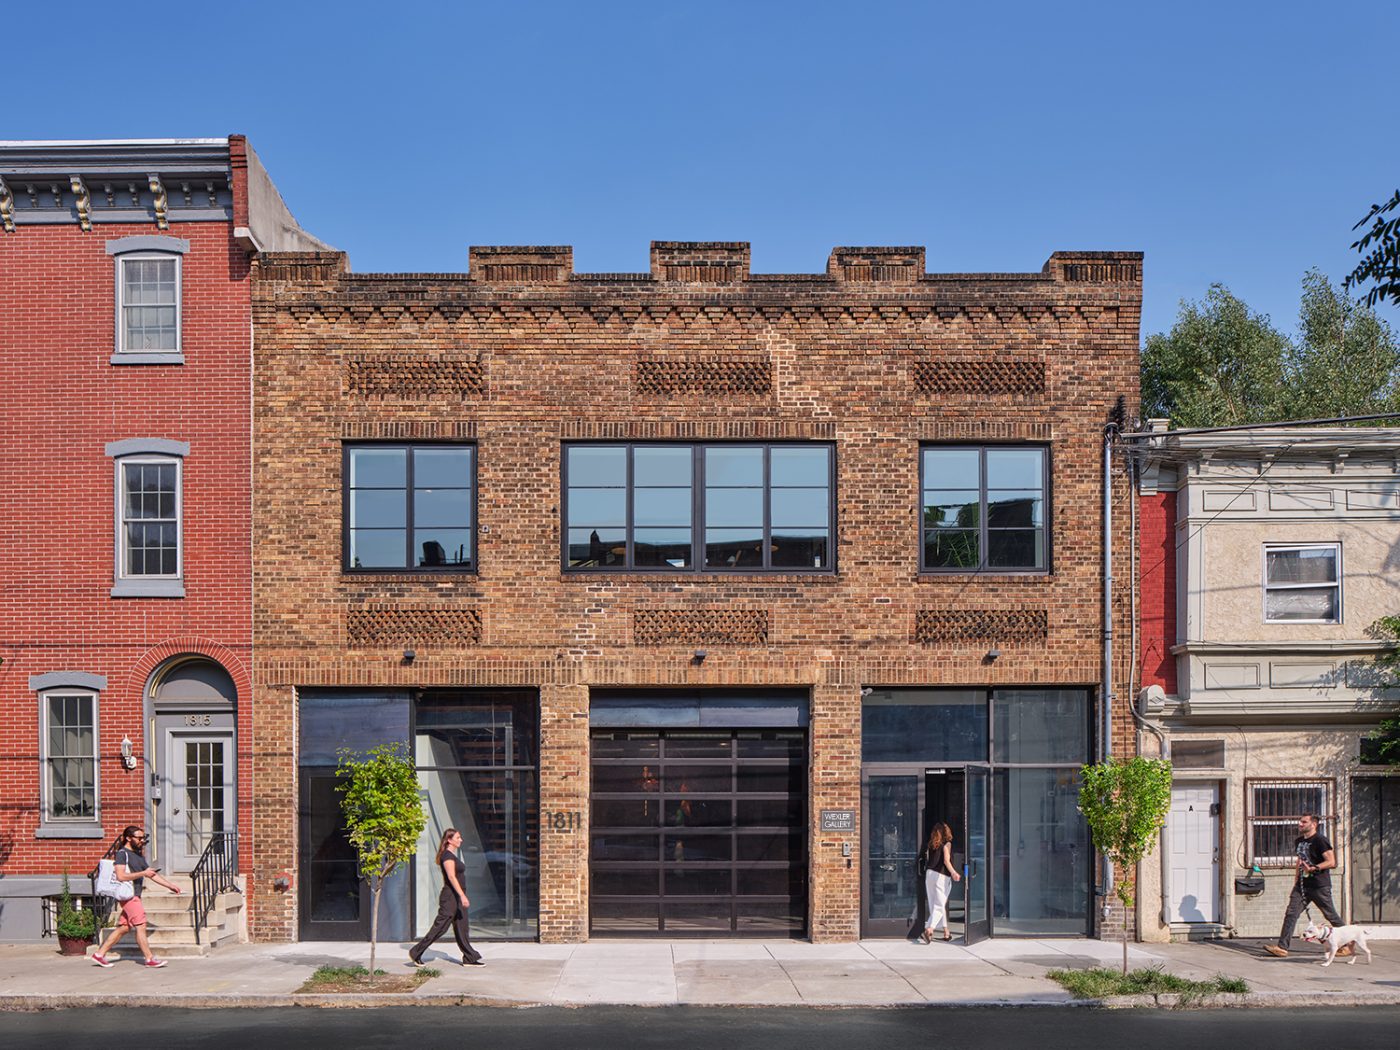 The tan-brick facade of Wexler Gallery's new home on Frankford Avenue in Philadelphia